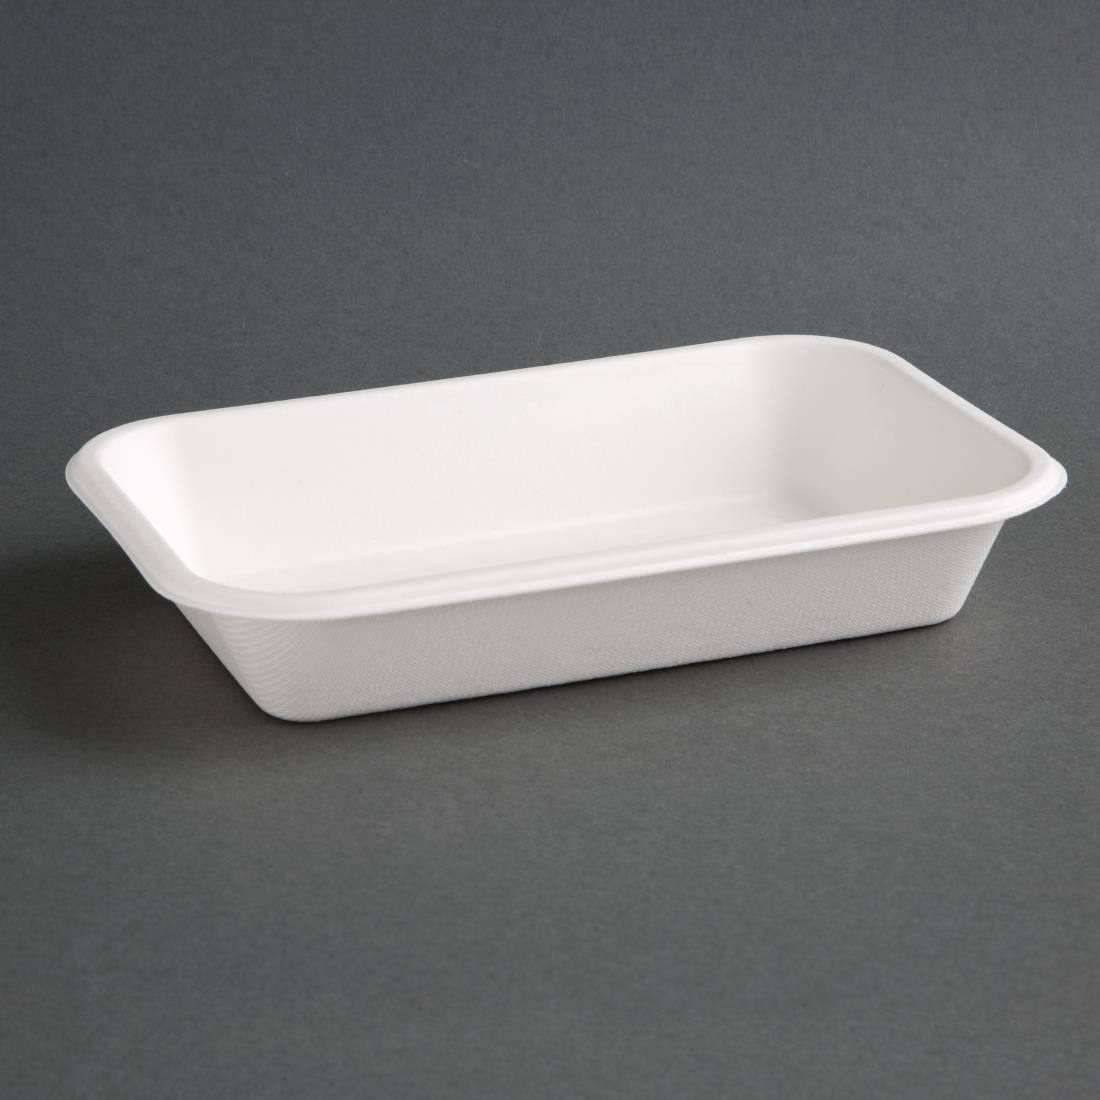 FC531 Fiesta Compostable Bagasse Food Trays 24oz (Pack of 50) JD Catering Equipment Solutions Ltd